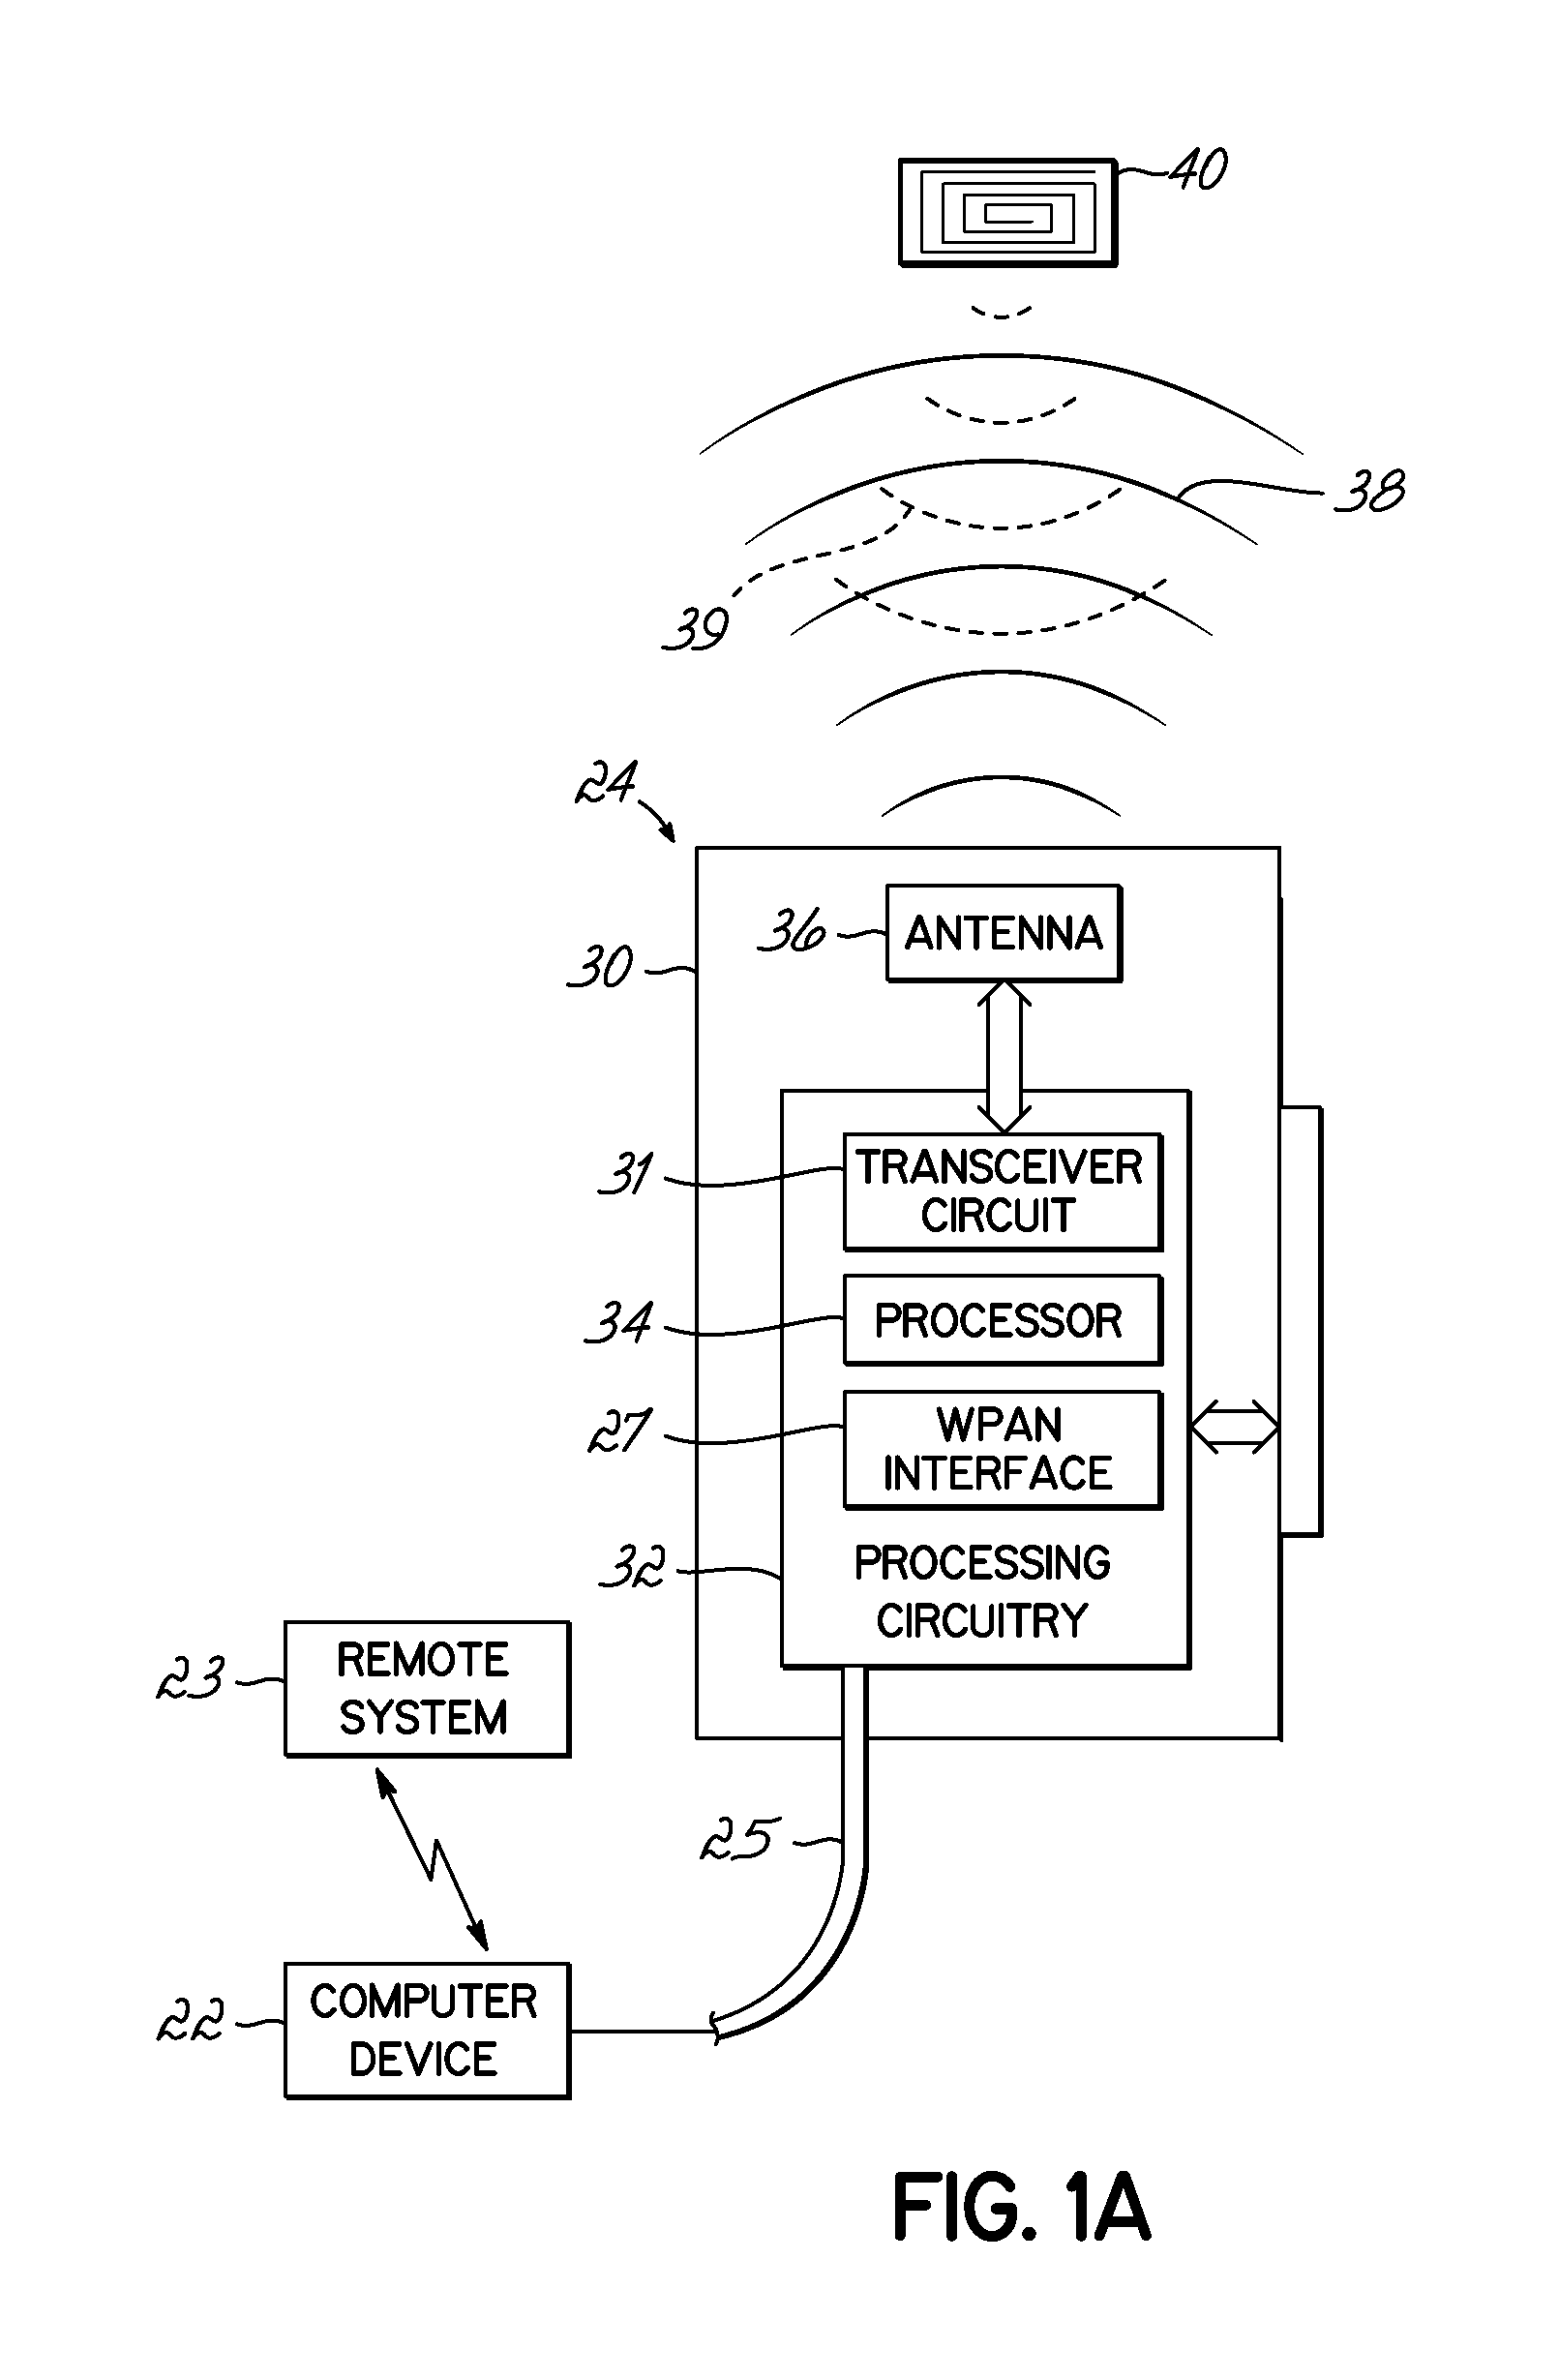 Method and system for correctly identifying specific RFID tags